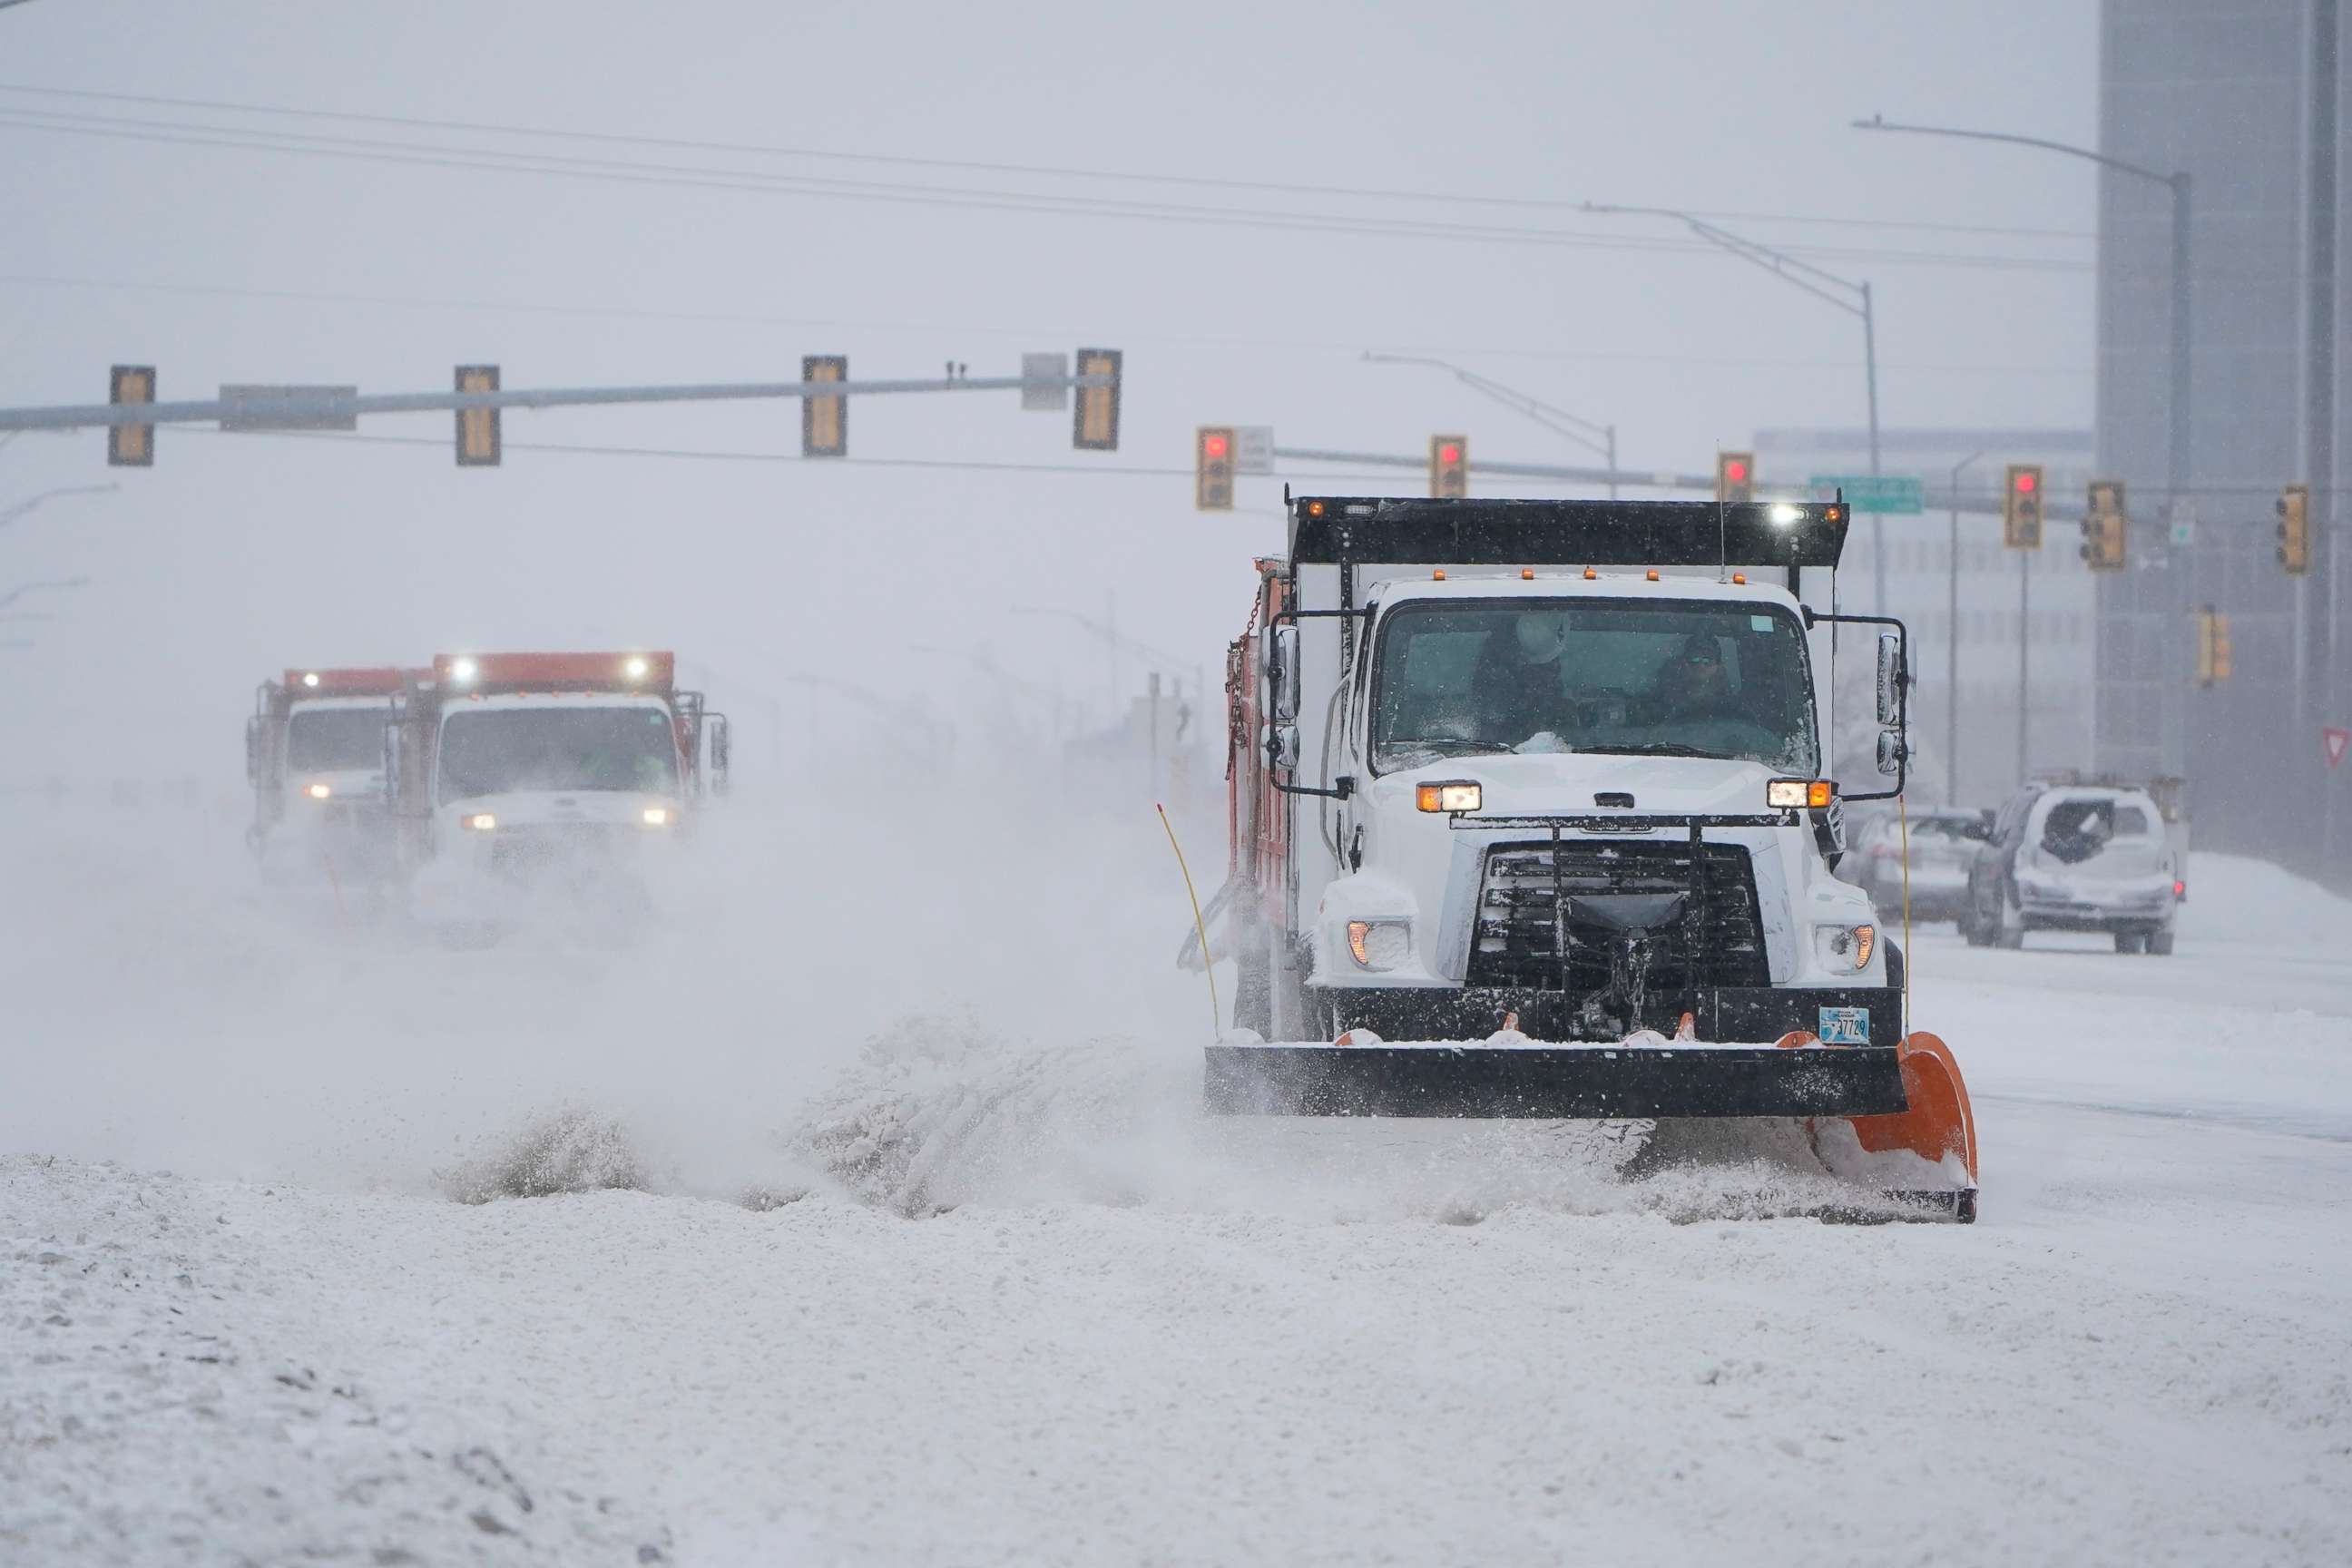 PHOTO: Snowplows works to clear the road during a winter storm Sunday, Feb. 14, 2021, in Oklahoma City. Snow and ice blanketed large swaths of the U.S. on Sunday, prompting canceled flights, making driving perilous and reaching into the Texas Gulf Coast.